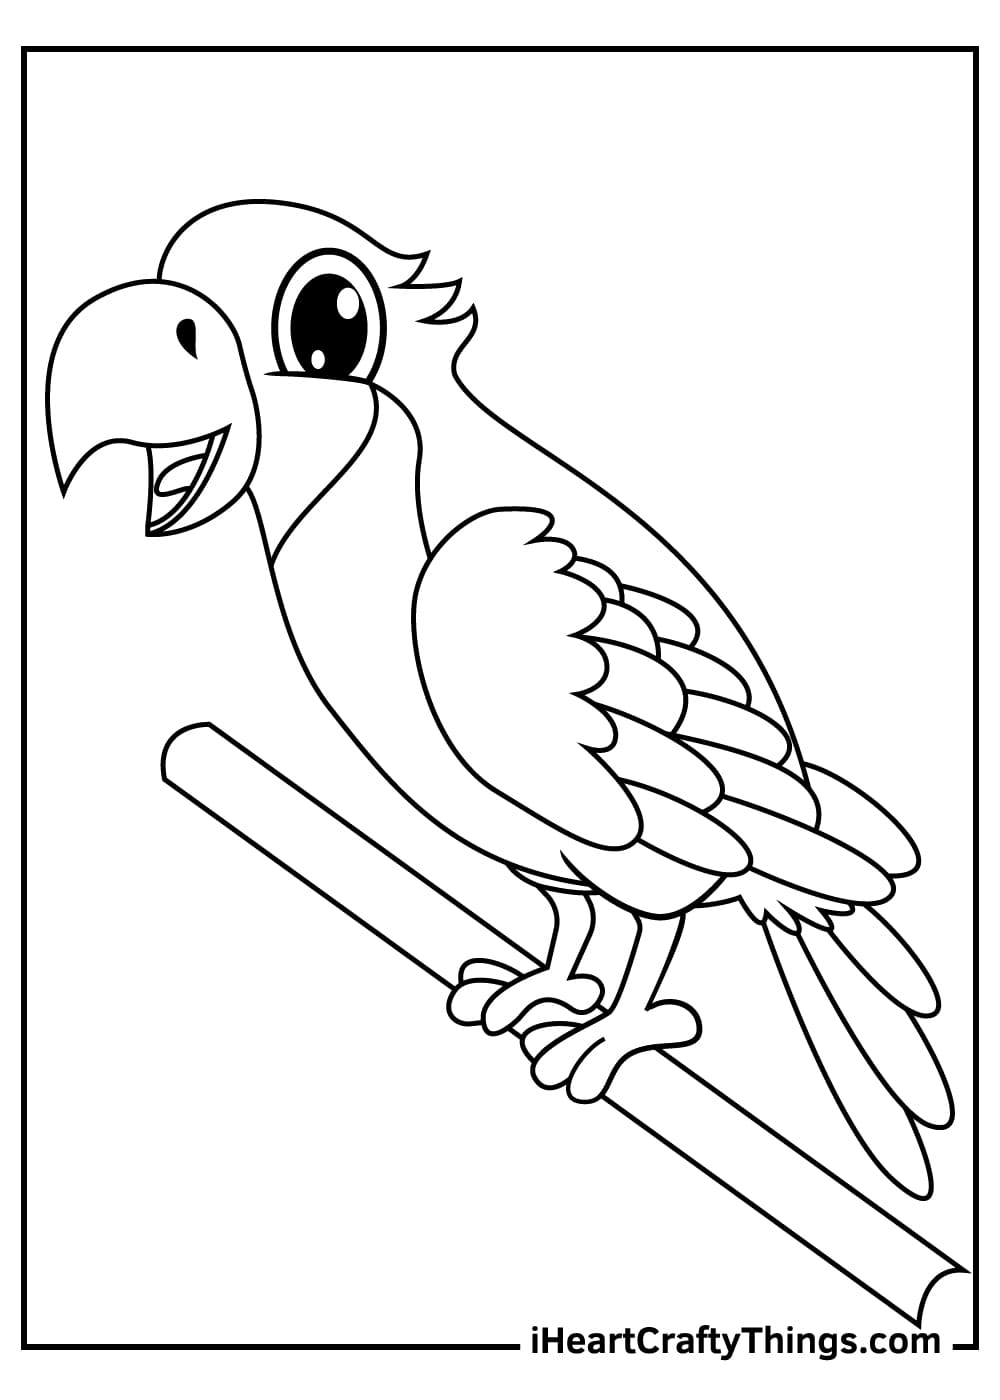 Free Printable Parrot Image Coloring Page